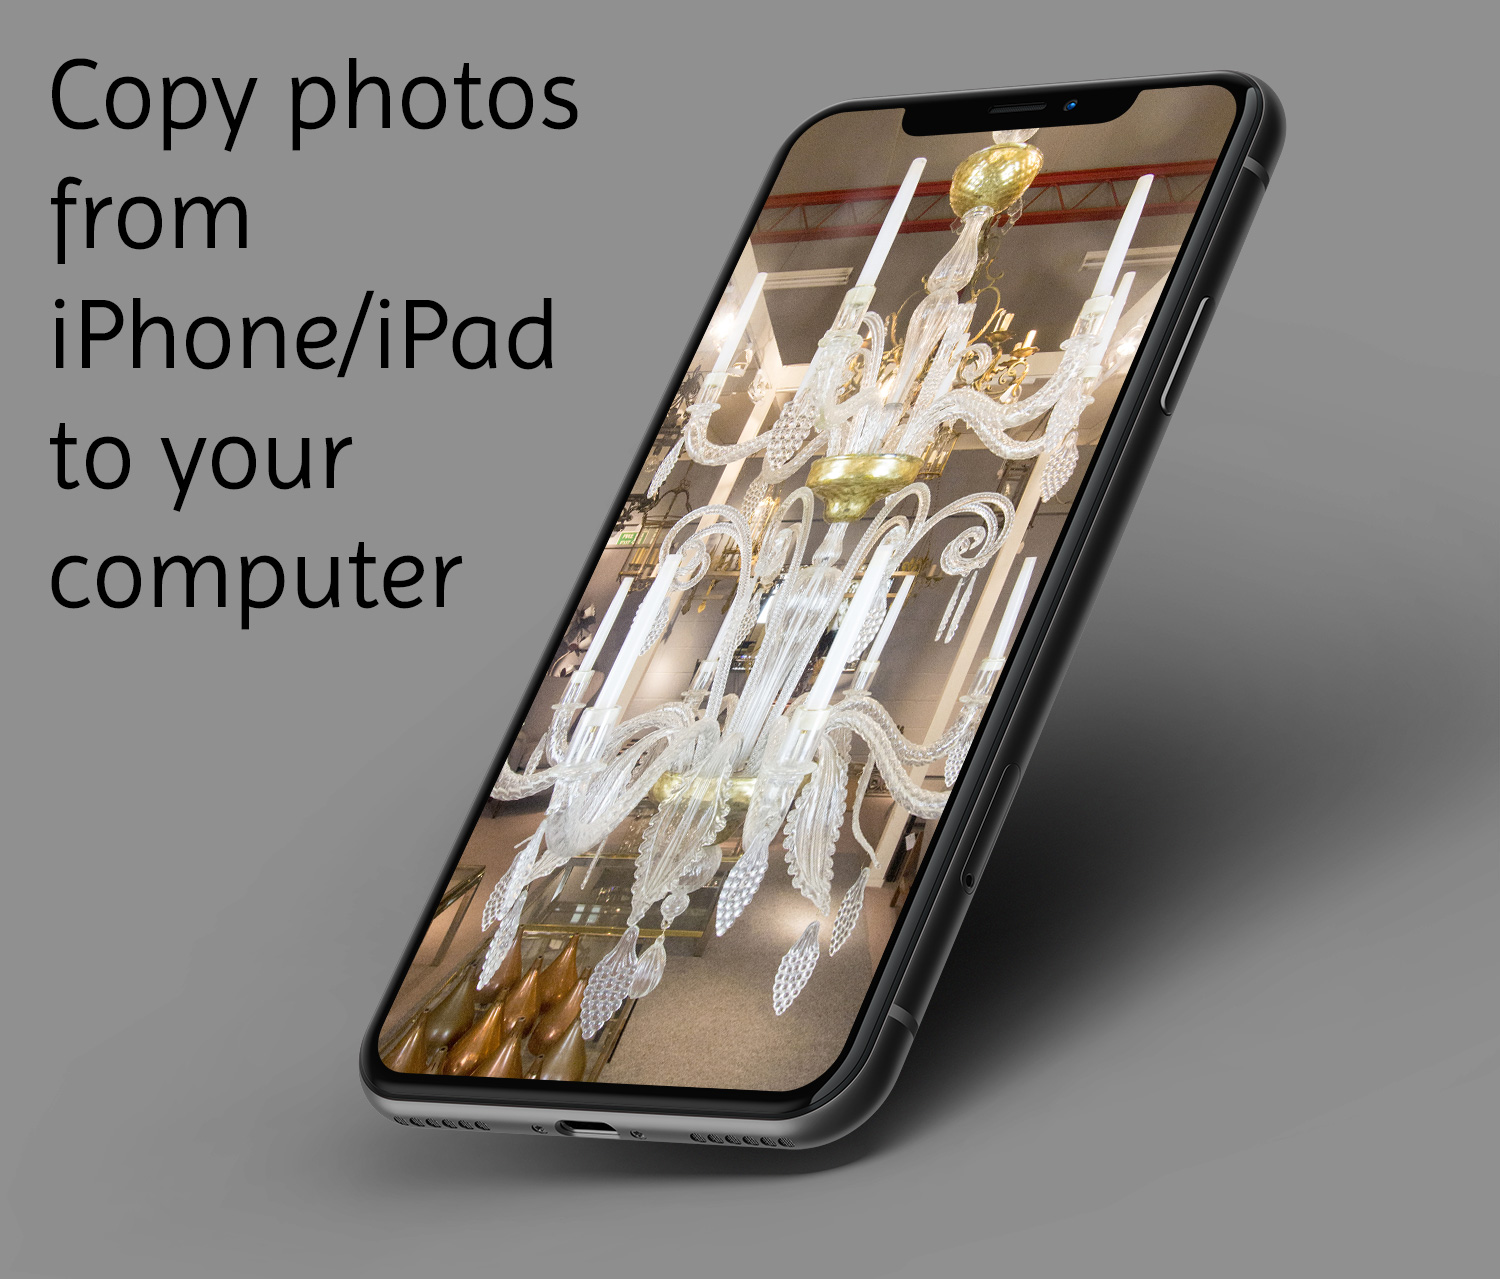 Copy photos from your iPhone or iPad to your computer